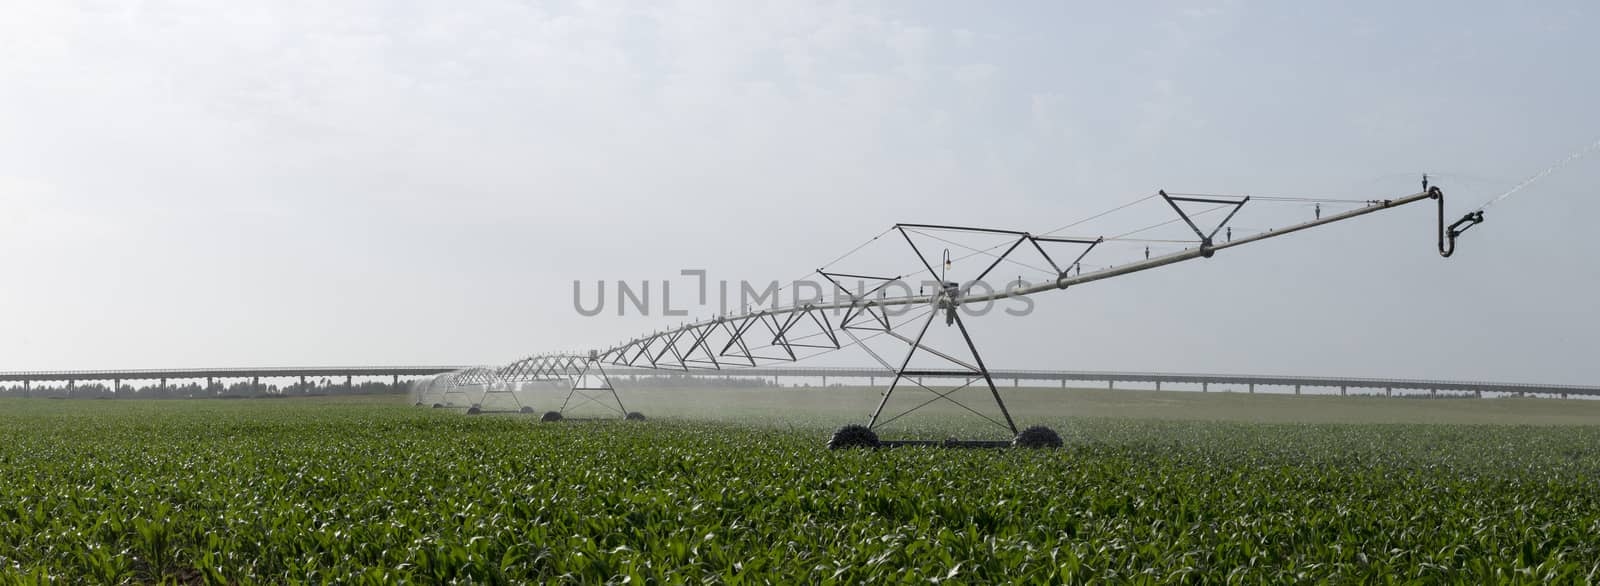 Landscape view of a center pivot system irrigation system working on a corn field.